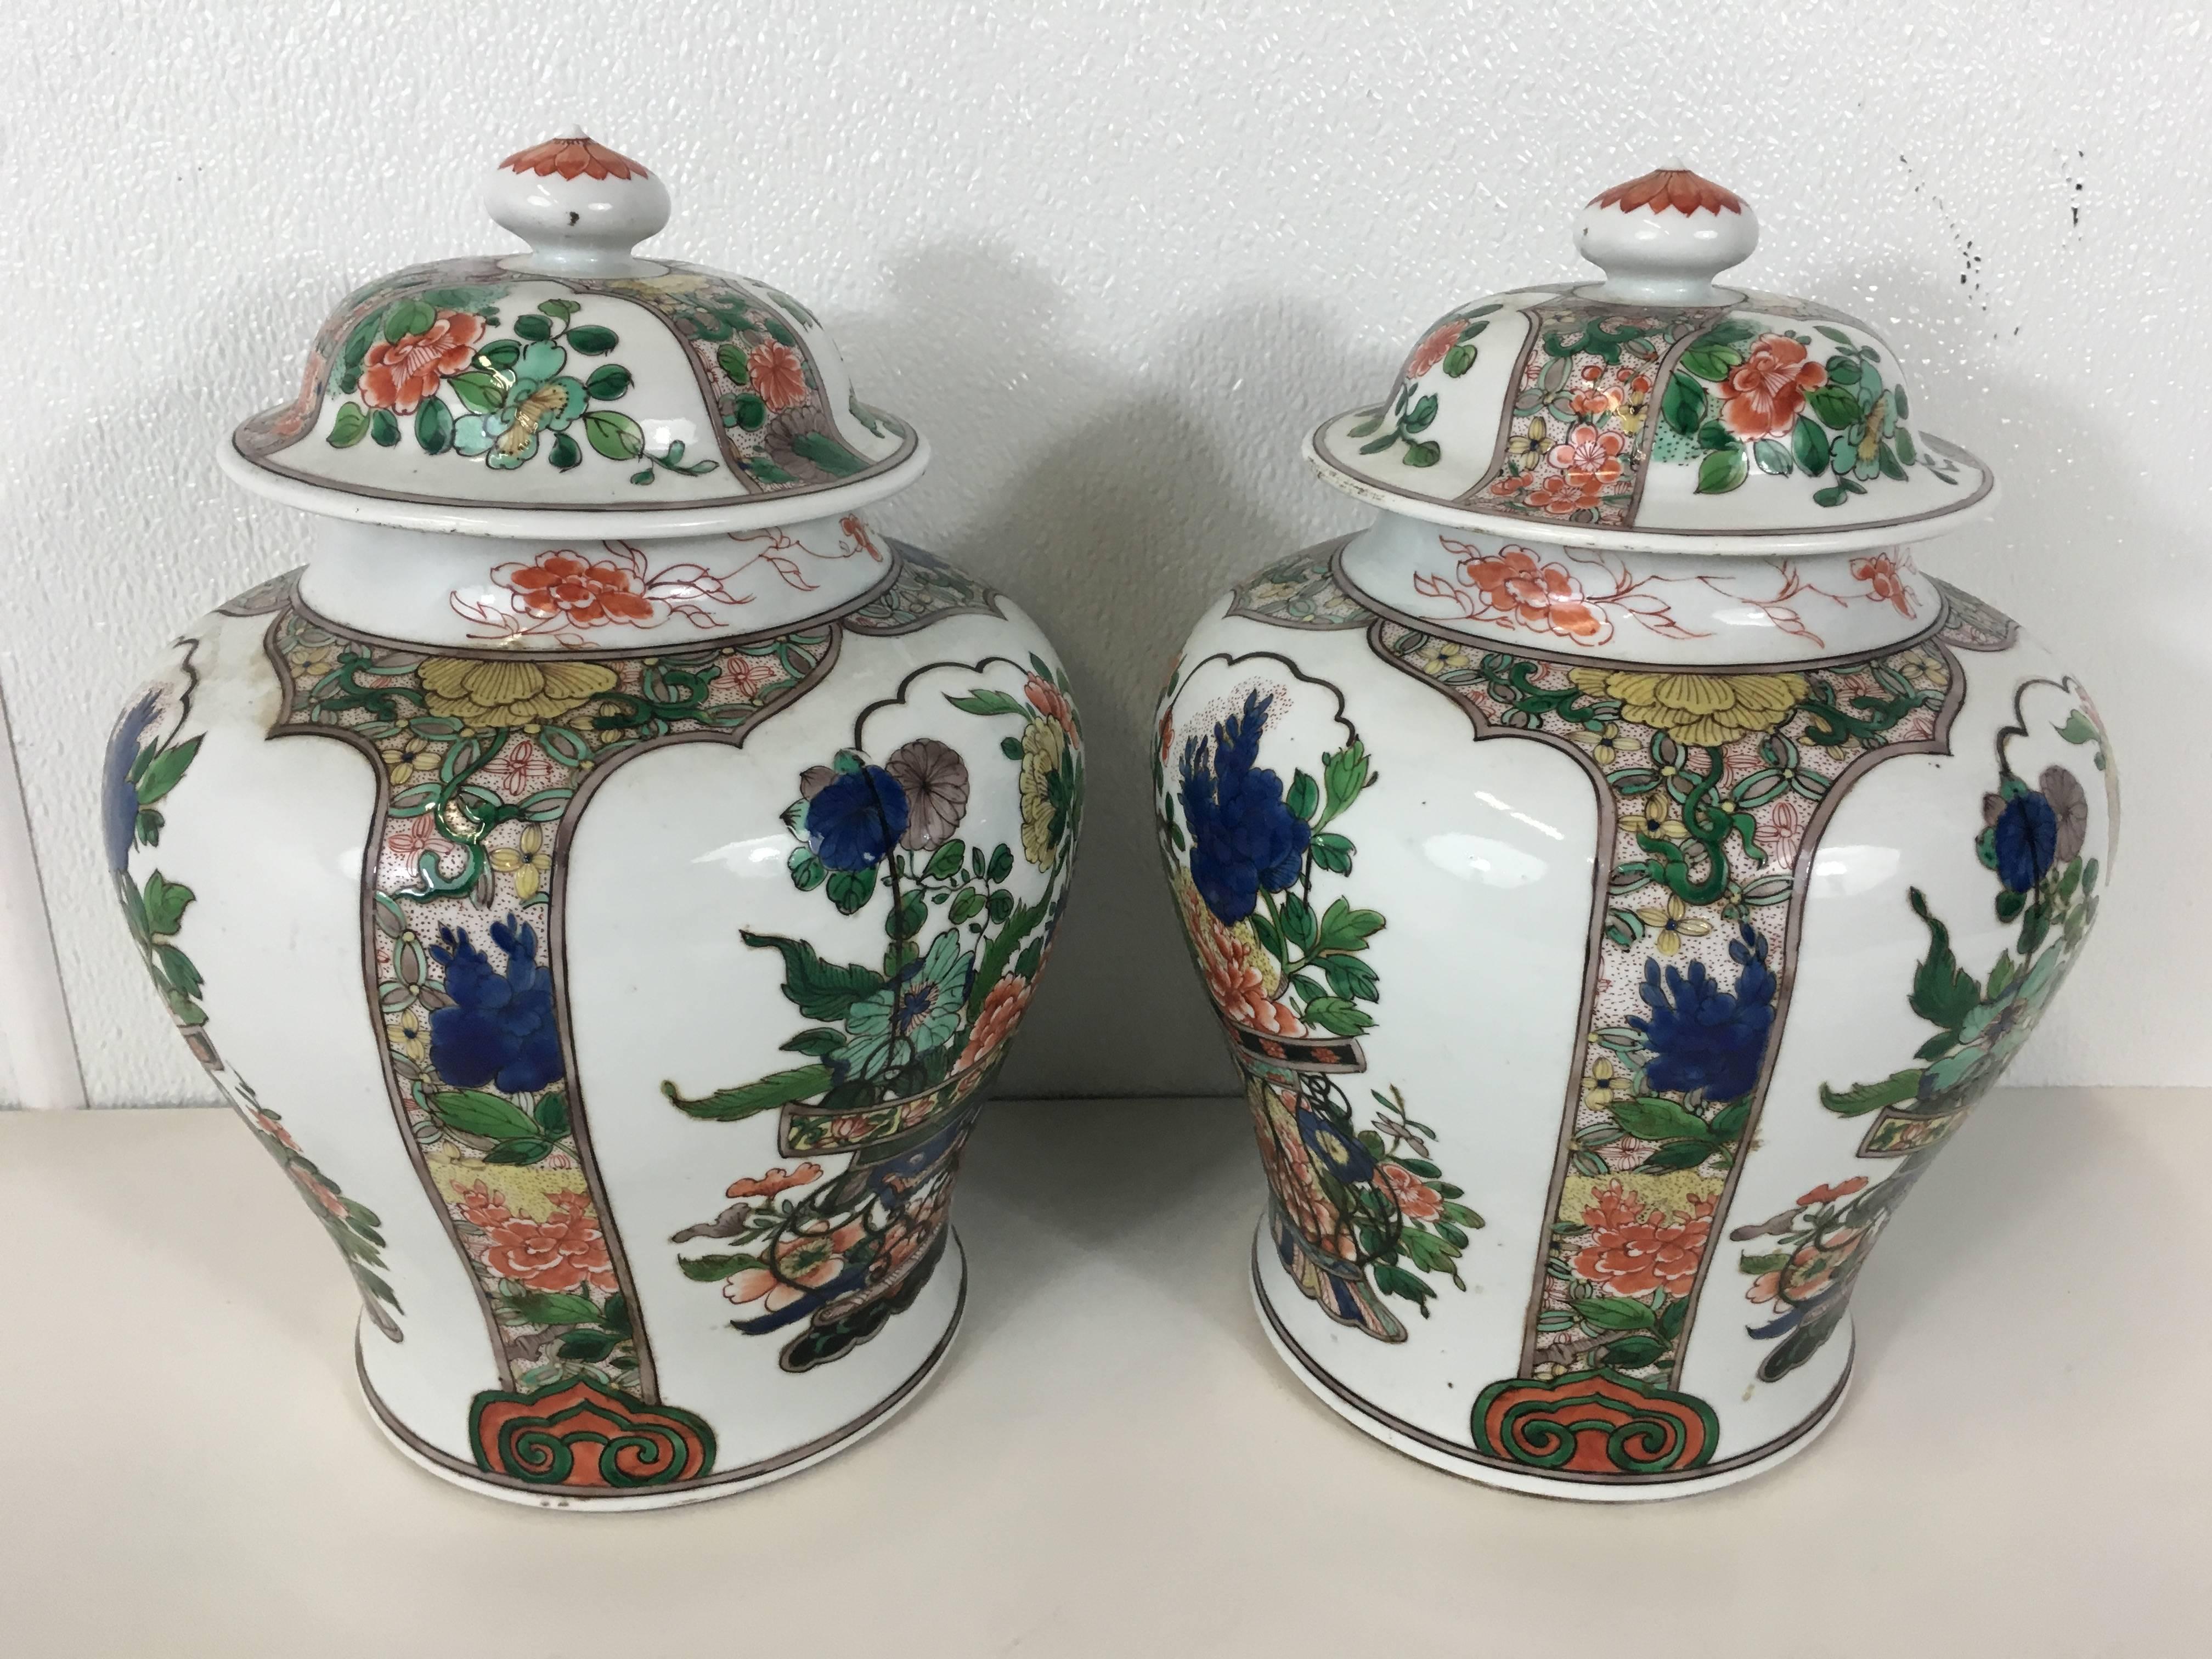 Pair of Samson famille verte temple jars, in the style of Chinese export. Painted with beautiful vignettes of baskets of flowers. Marked with Samson cypher.